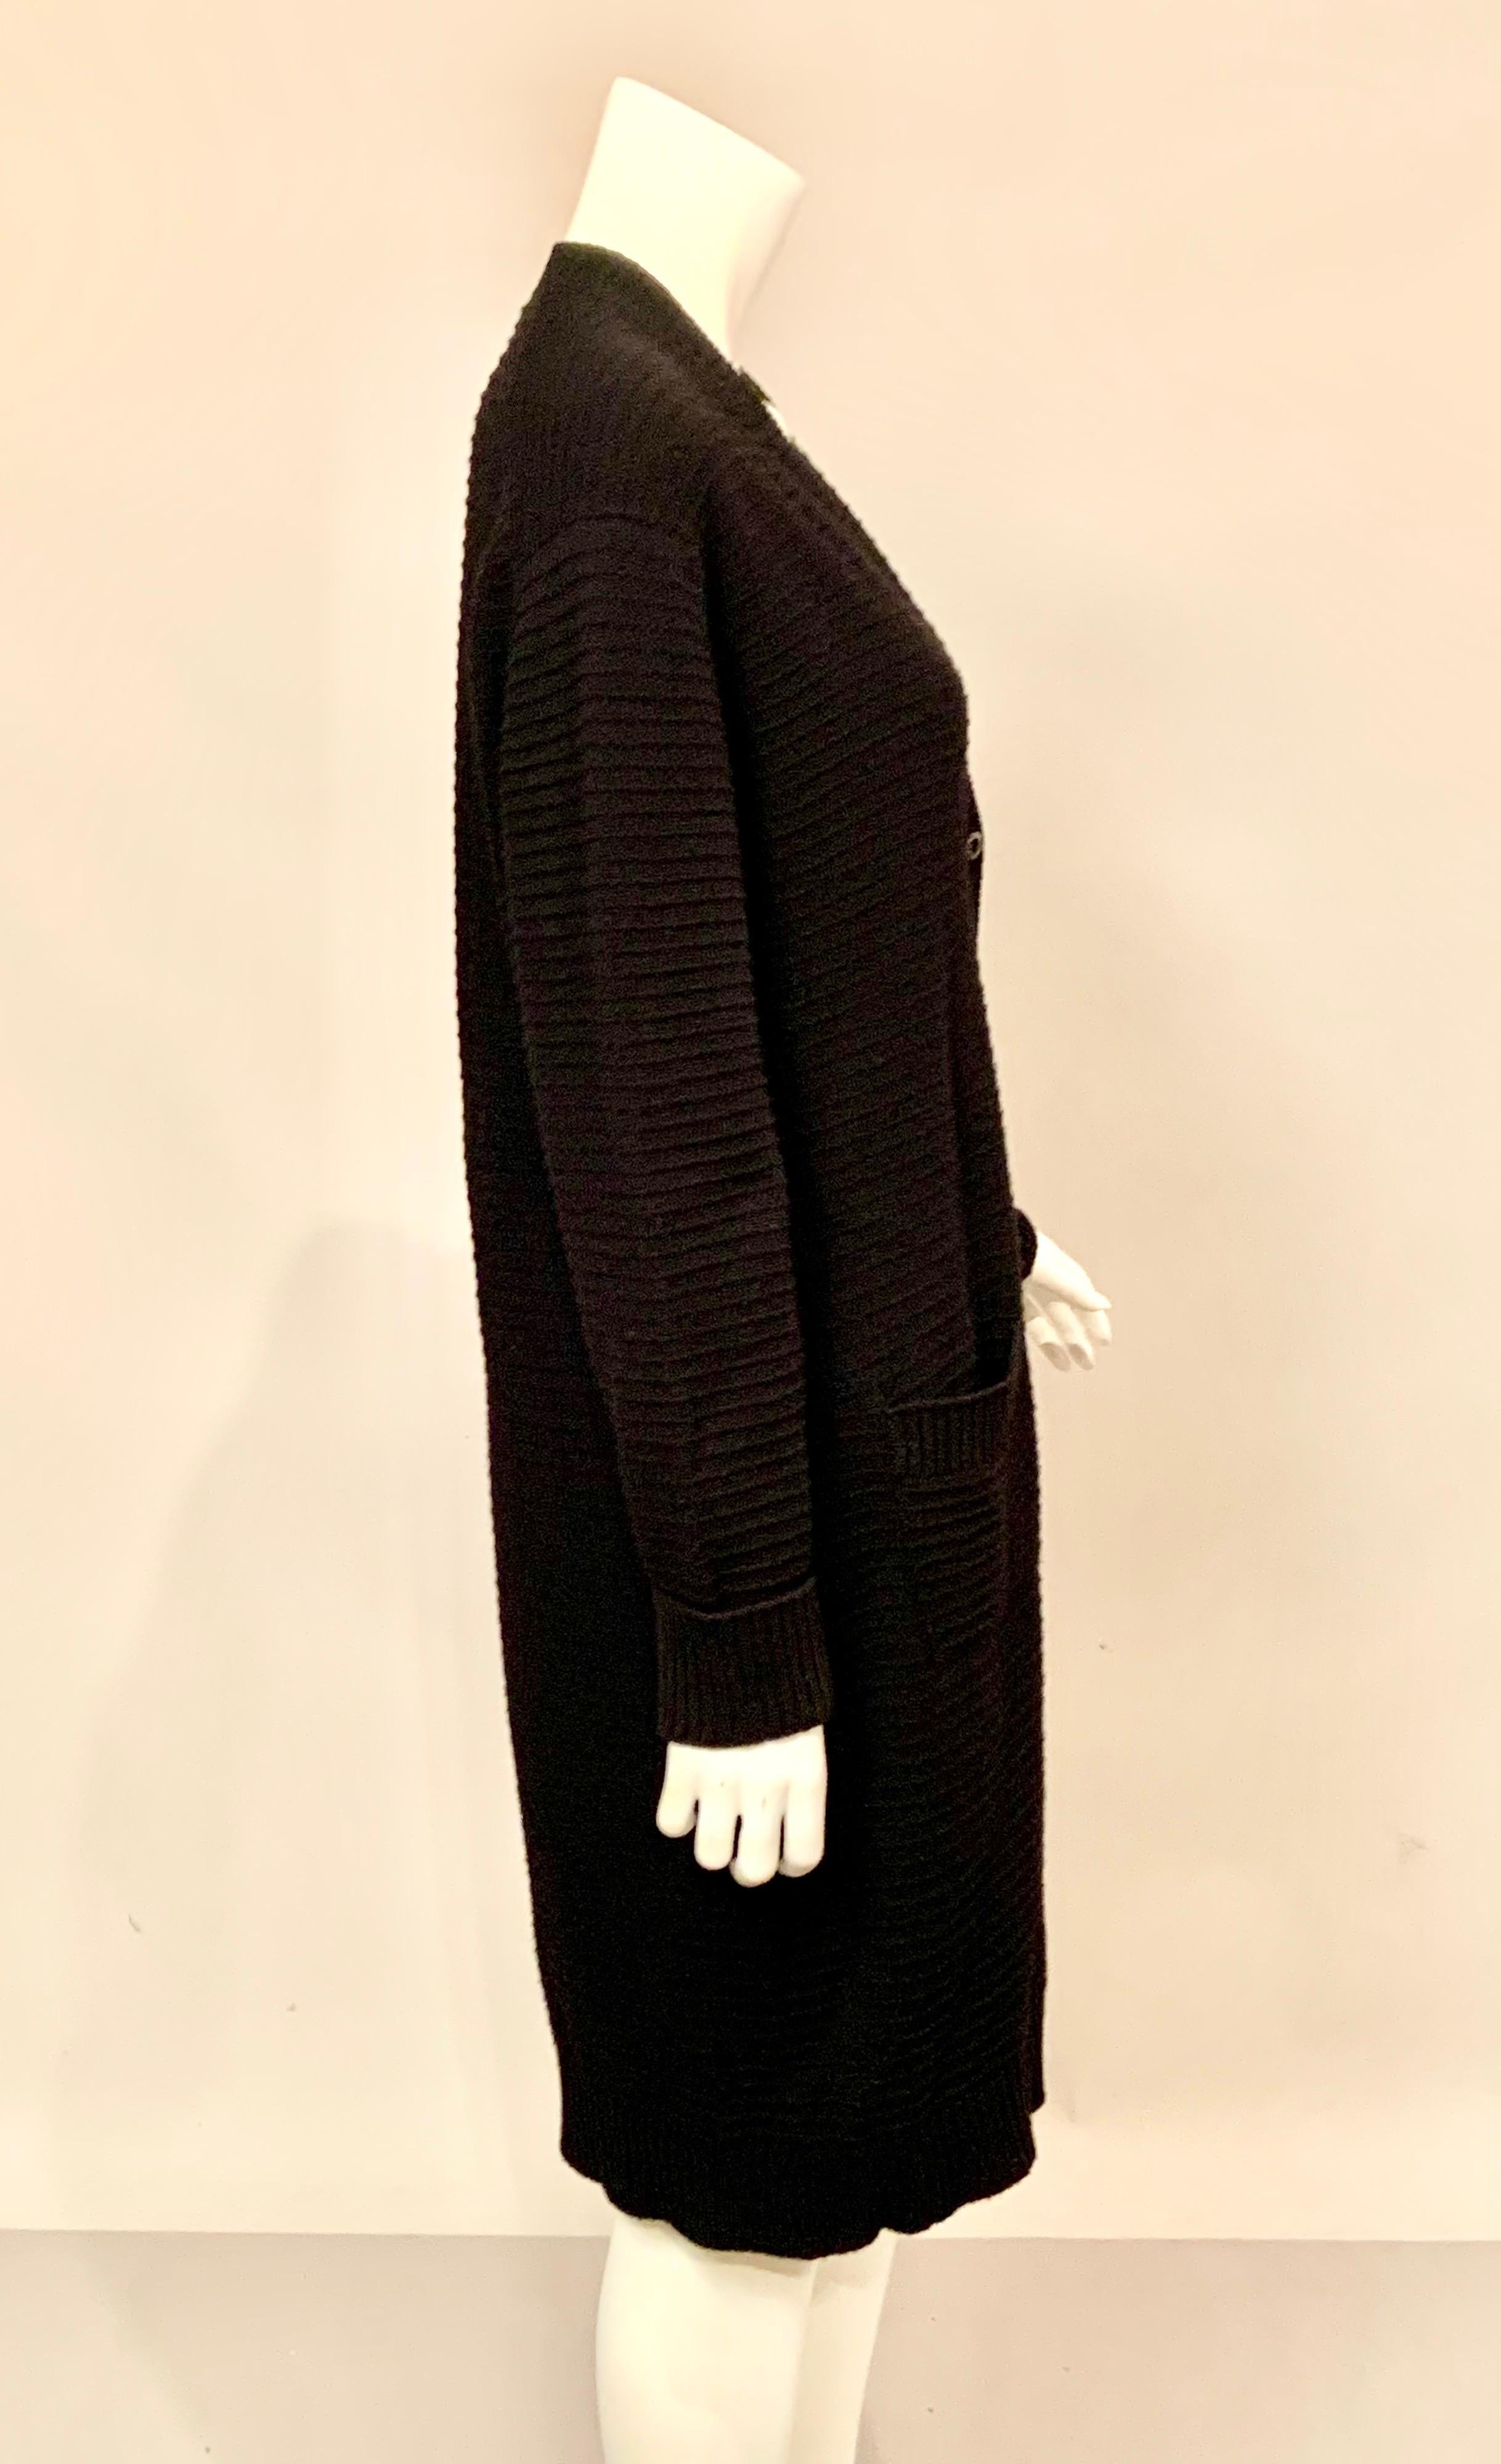 Chanel Black Cashmere Long Cardigan Sweater, Larger Size 2